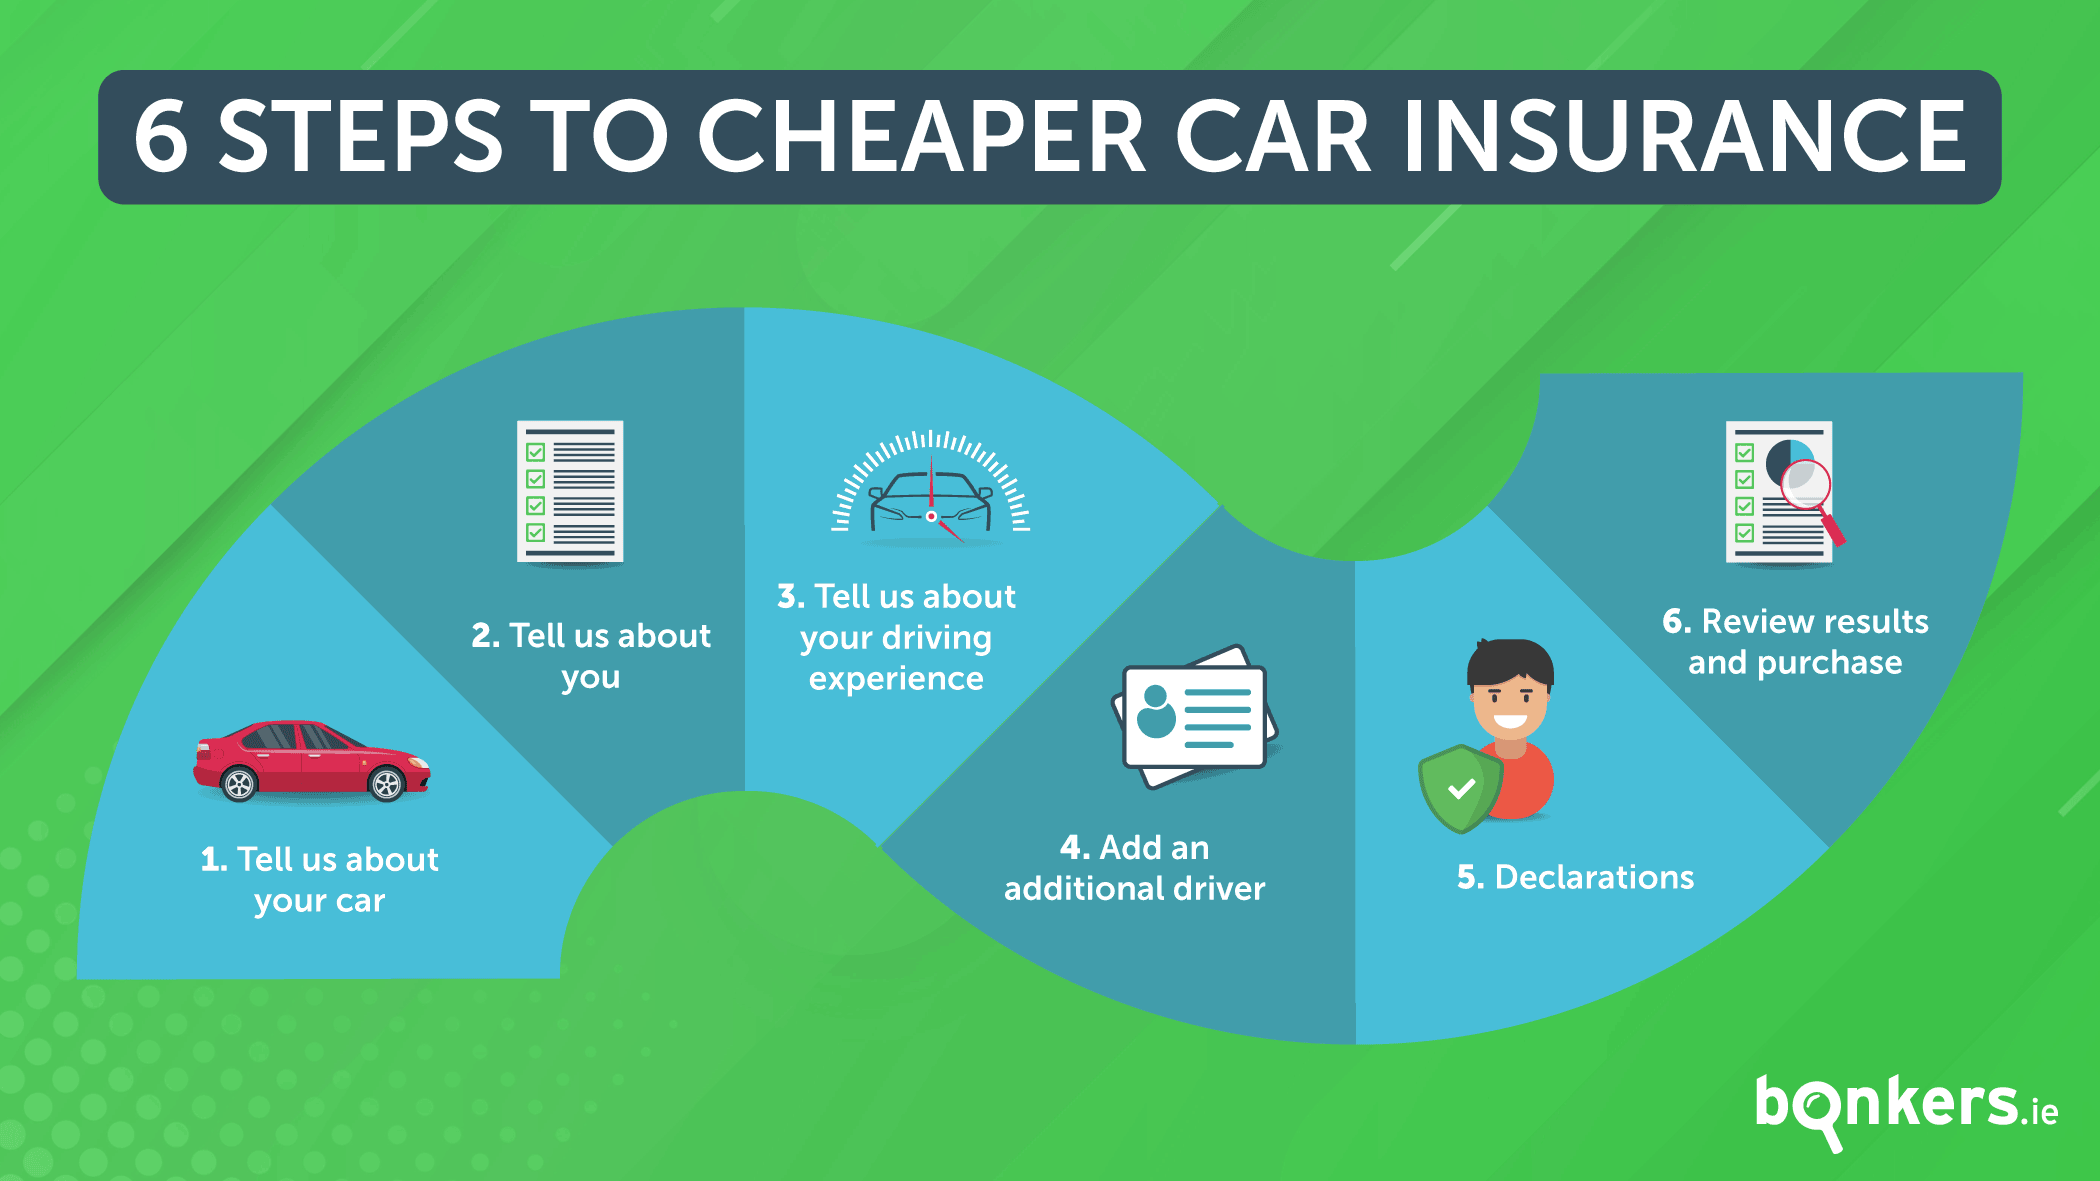 How to get cheaper car insurance on bonkers.ie  bonkers.ie